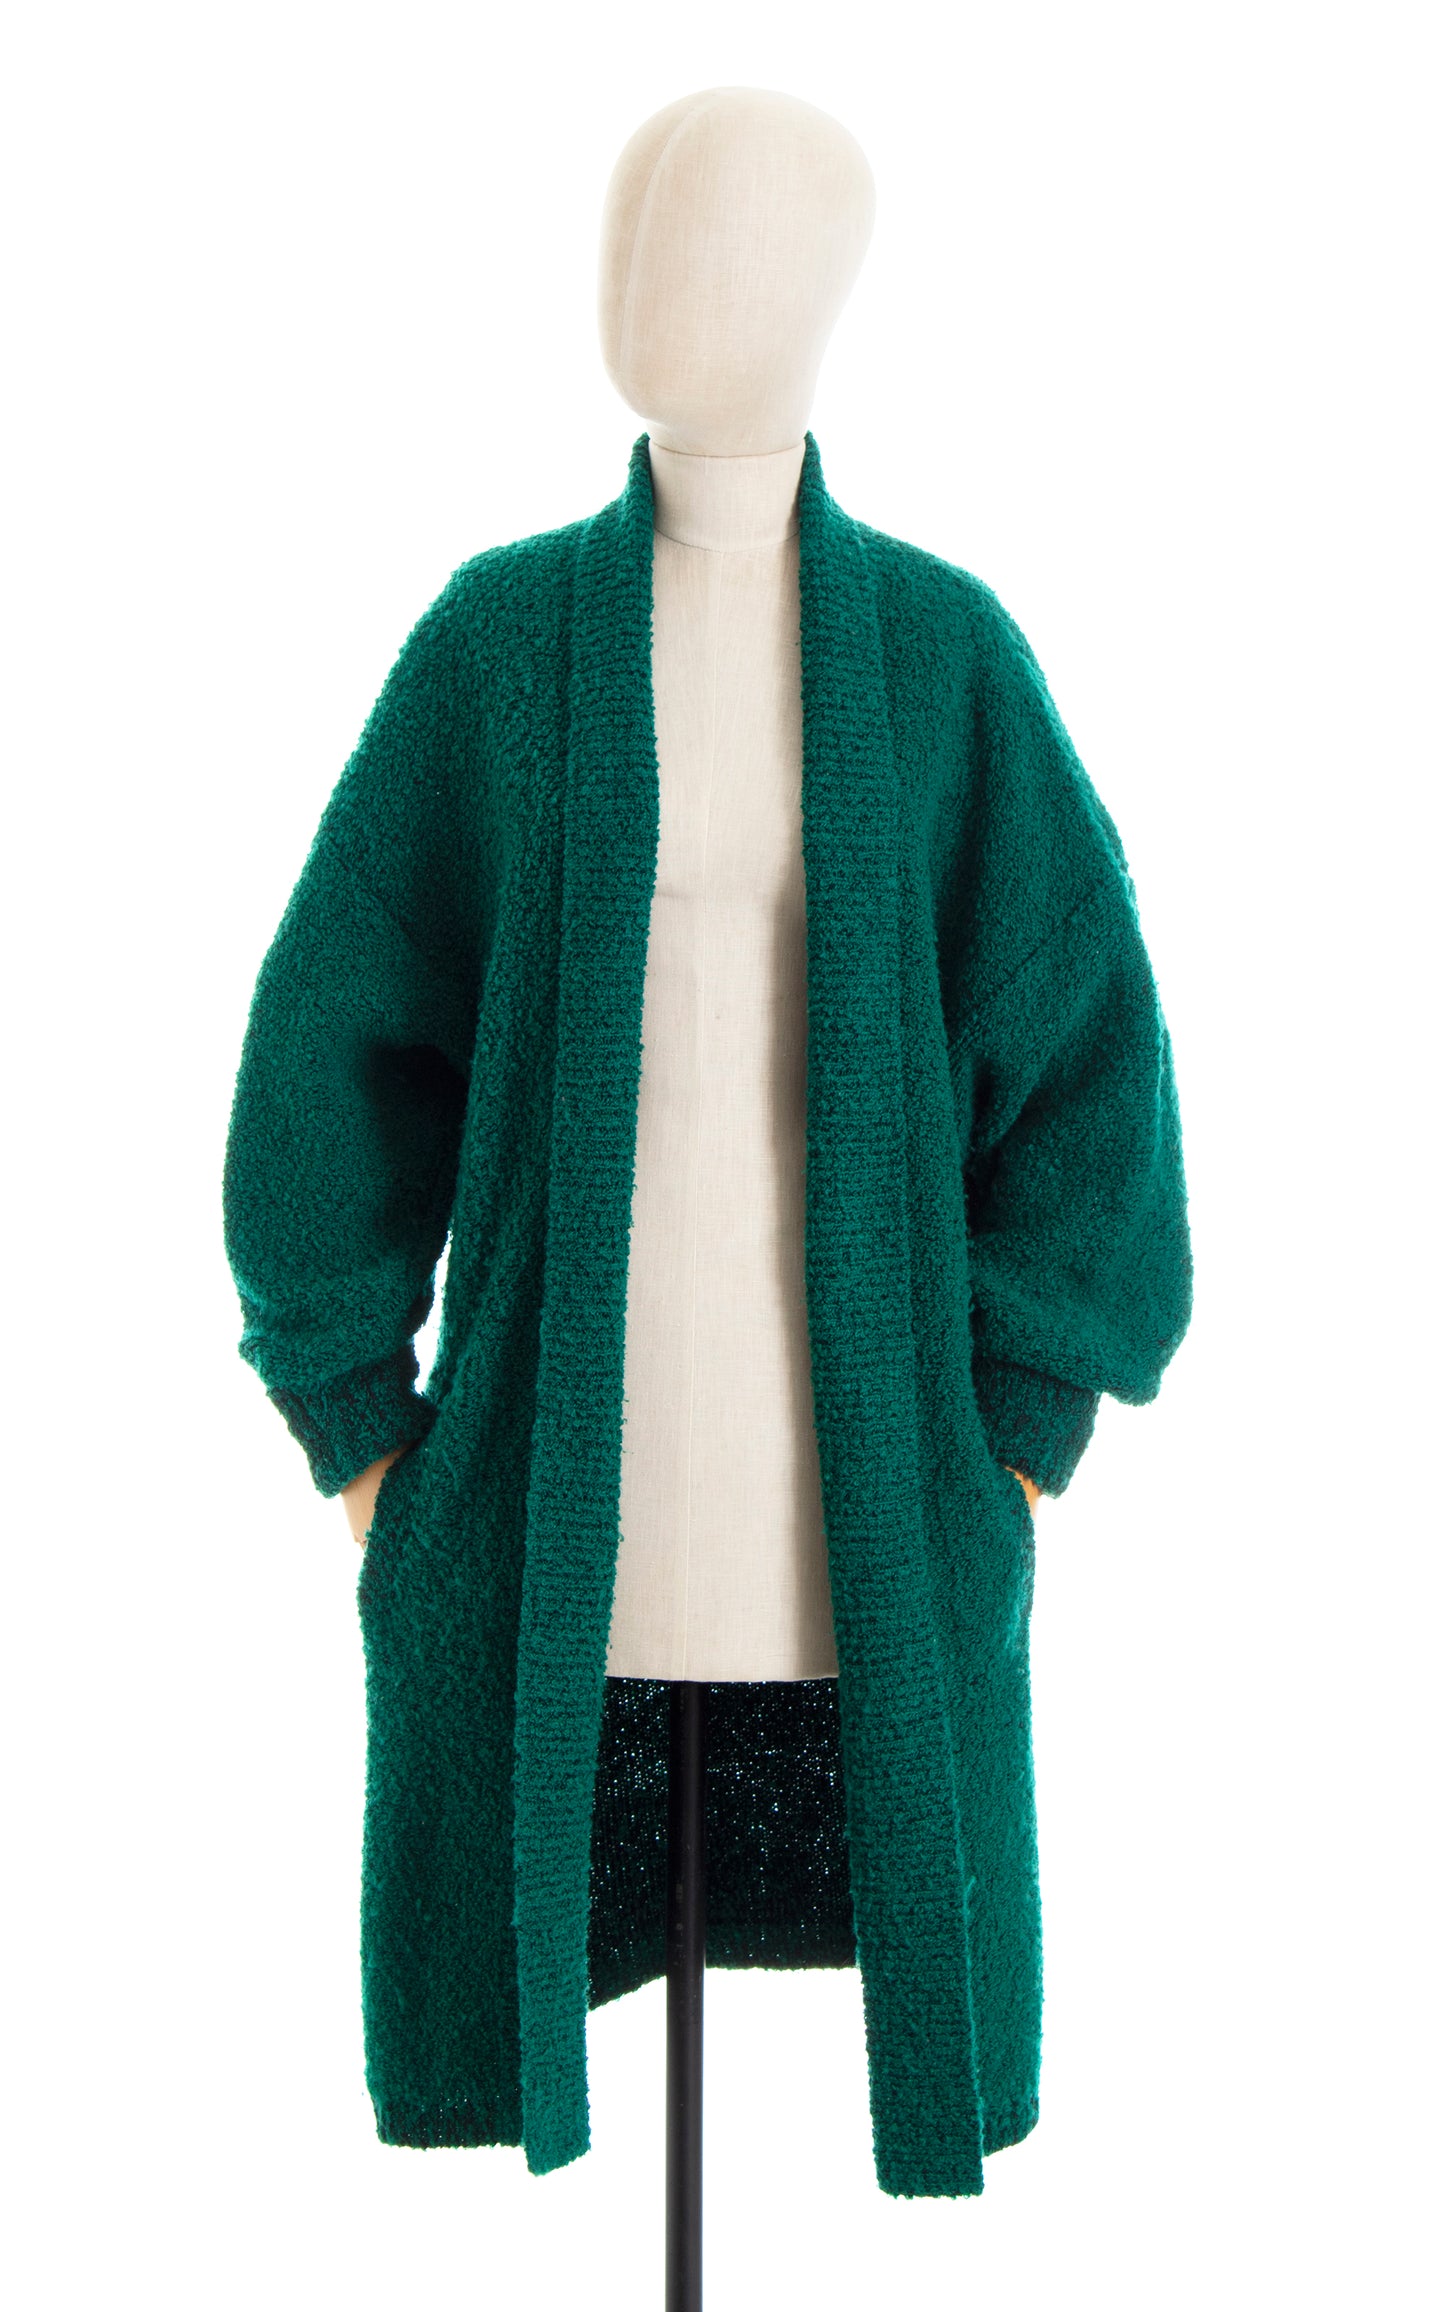 Vintage 1980s 80s Cozy Boucle Green Knit Oversized Sweater Coat Cardigan Birthday Life Vintage